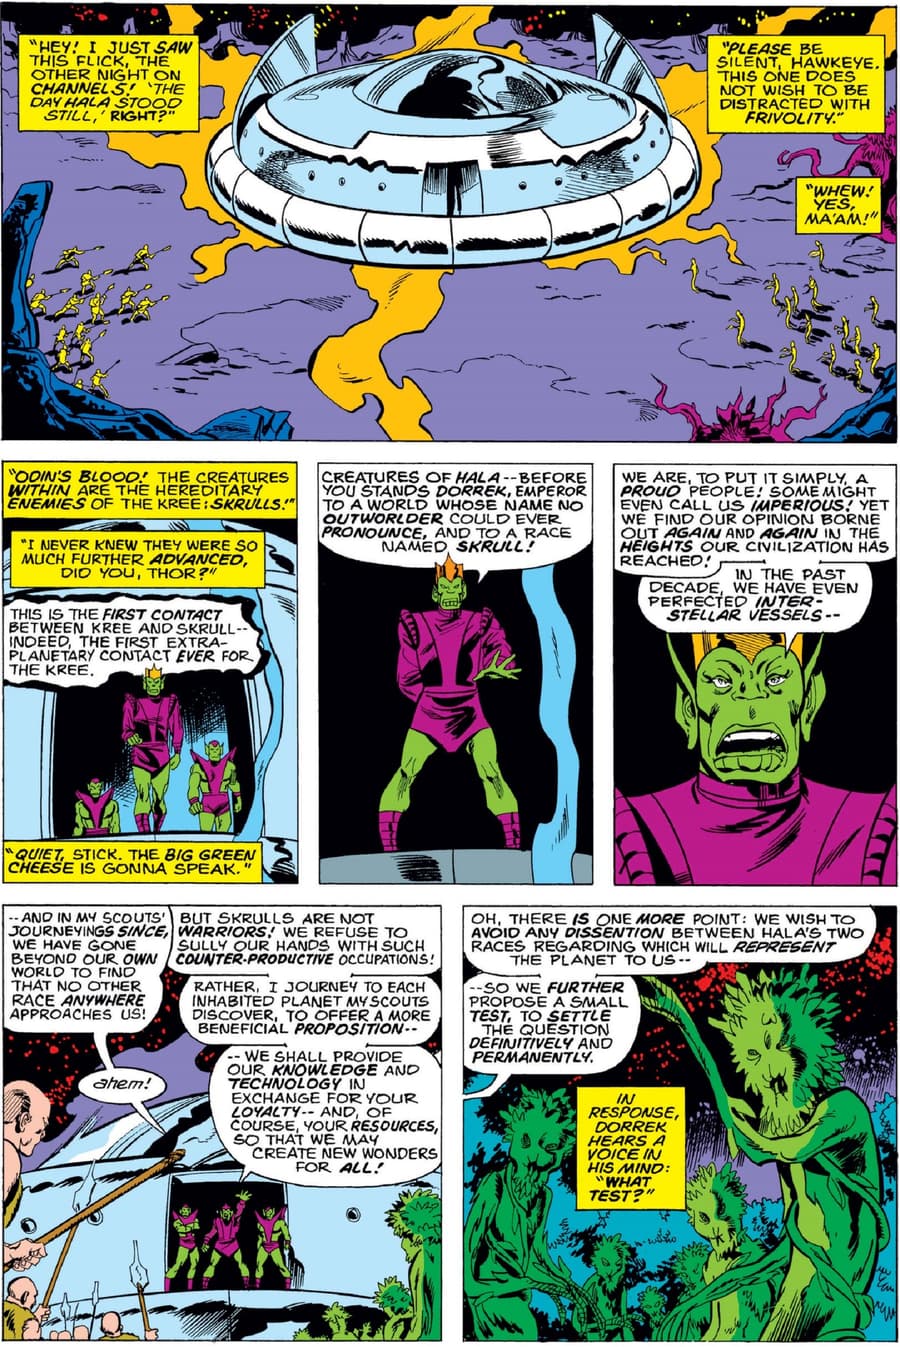 First Contact between the Kree and the Skrull in AVENGERS (1963) #133.